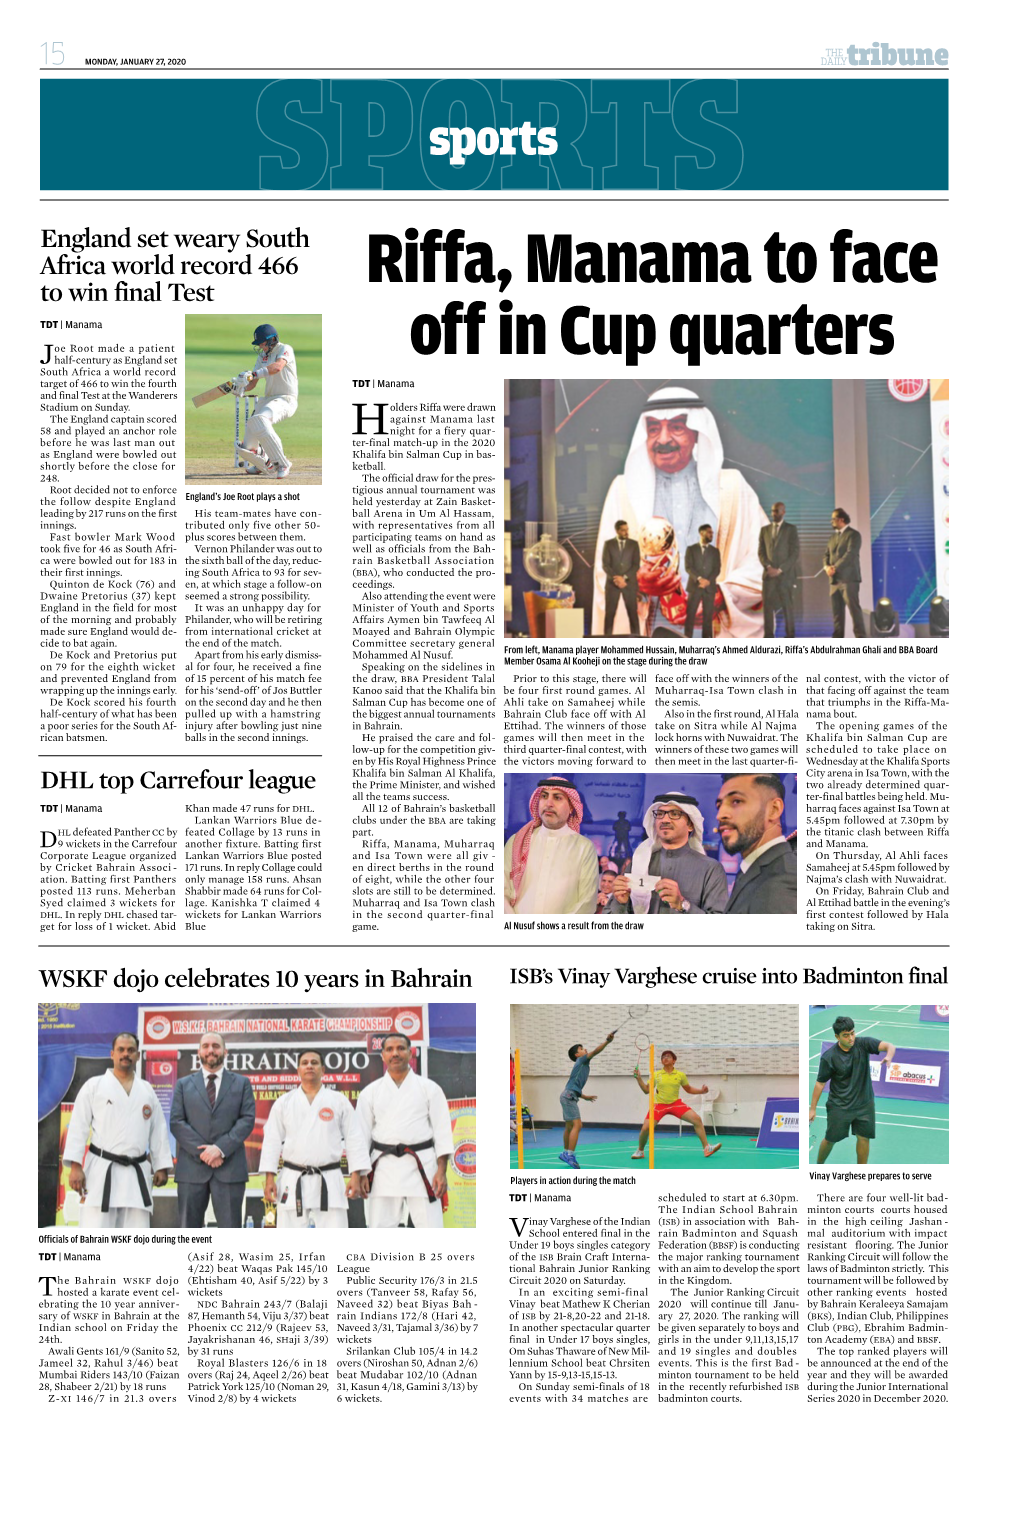 Riffa, Manama to Face Off in Cup Quarters